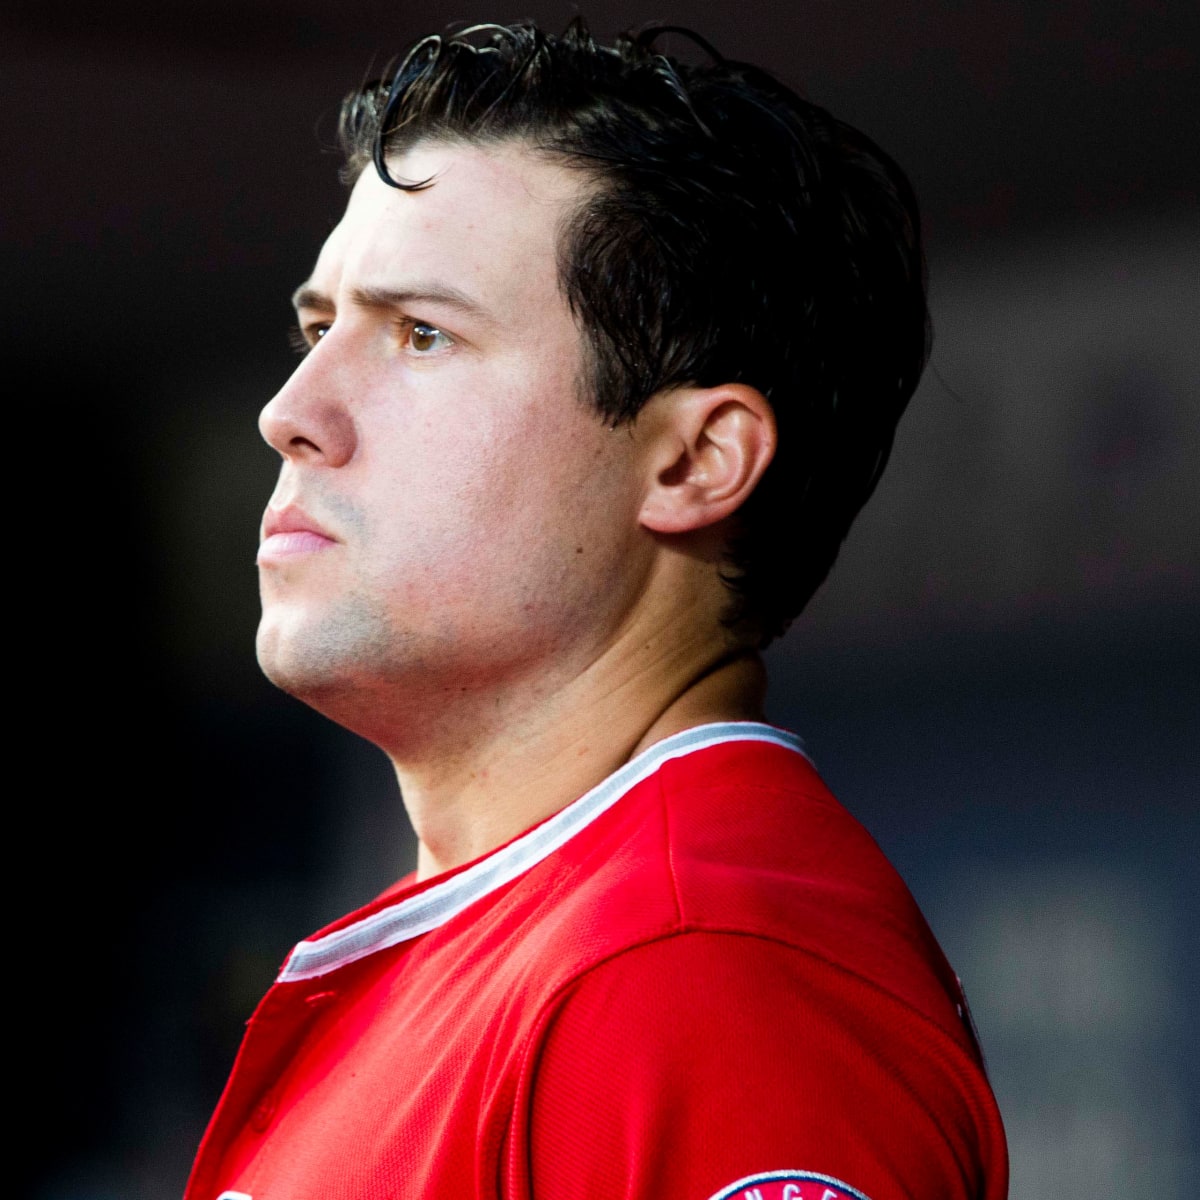 Police say currently no evidence to suggest Angels pitcher Tyler Skaggs  died from an overdose